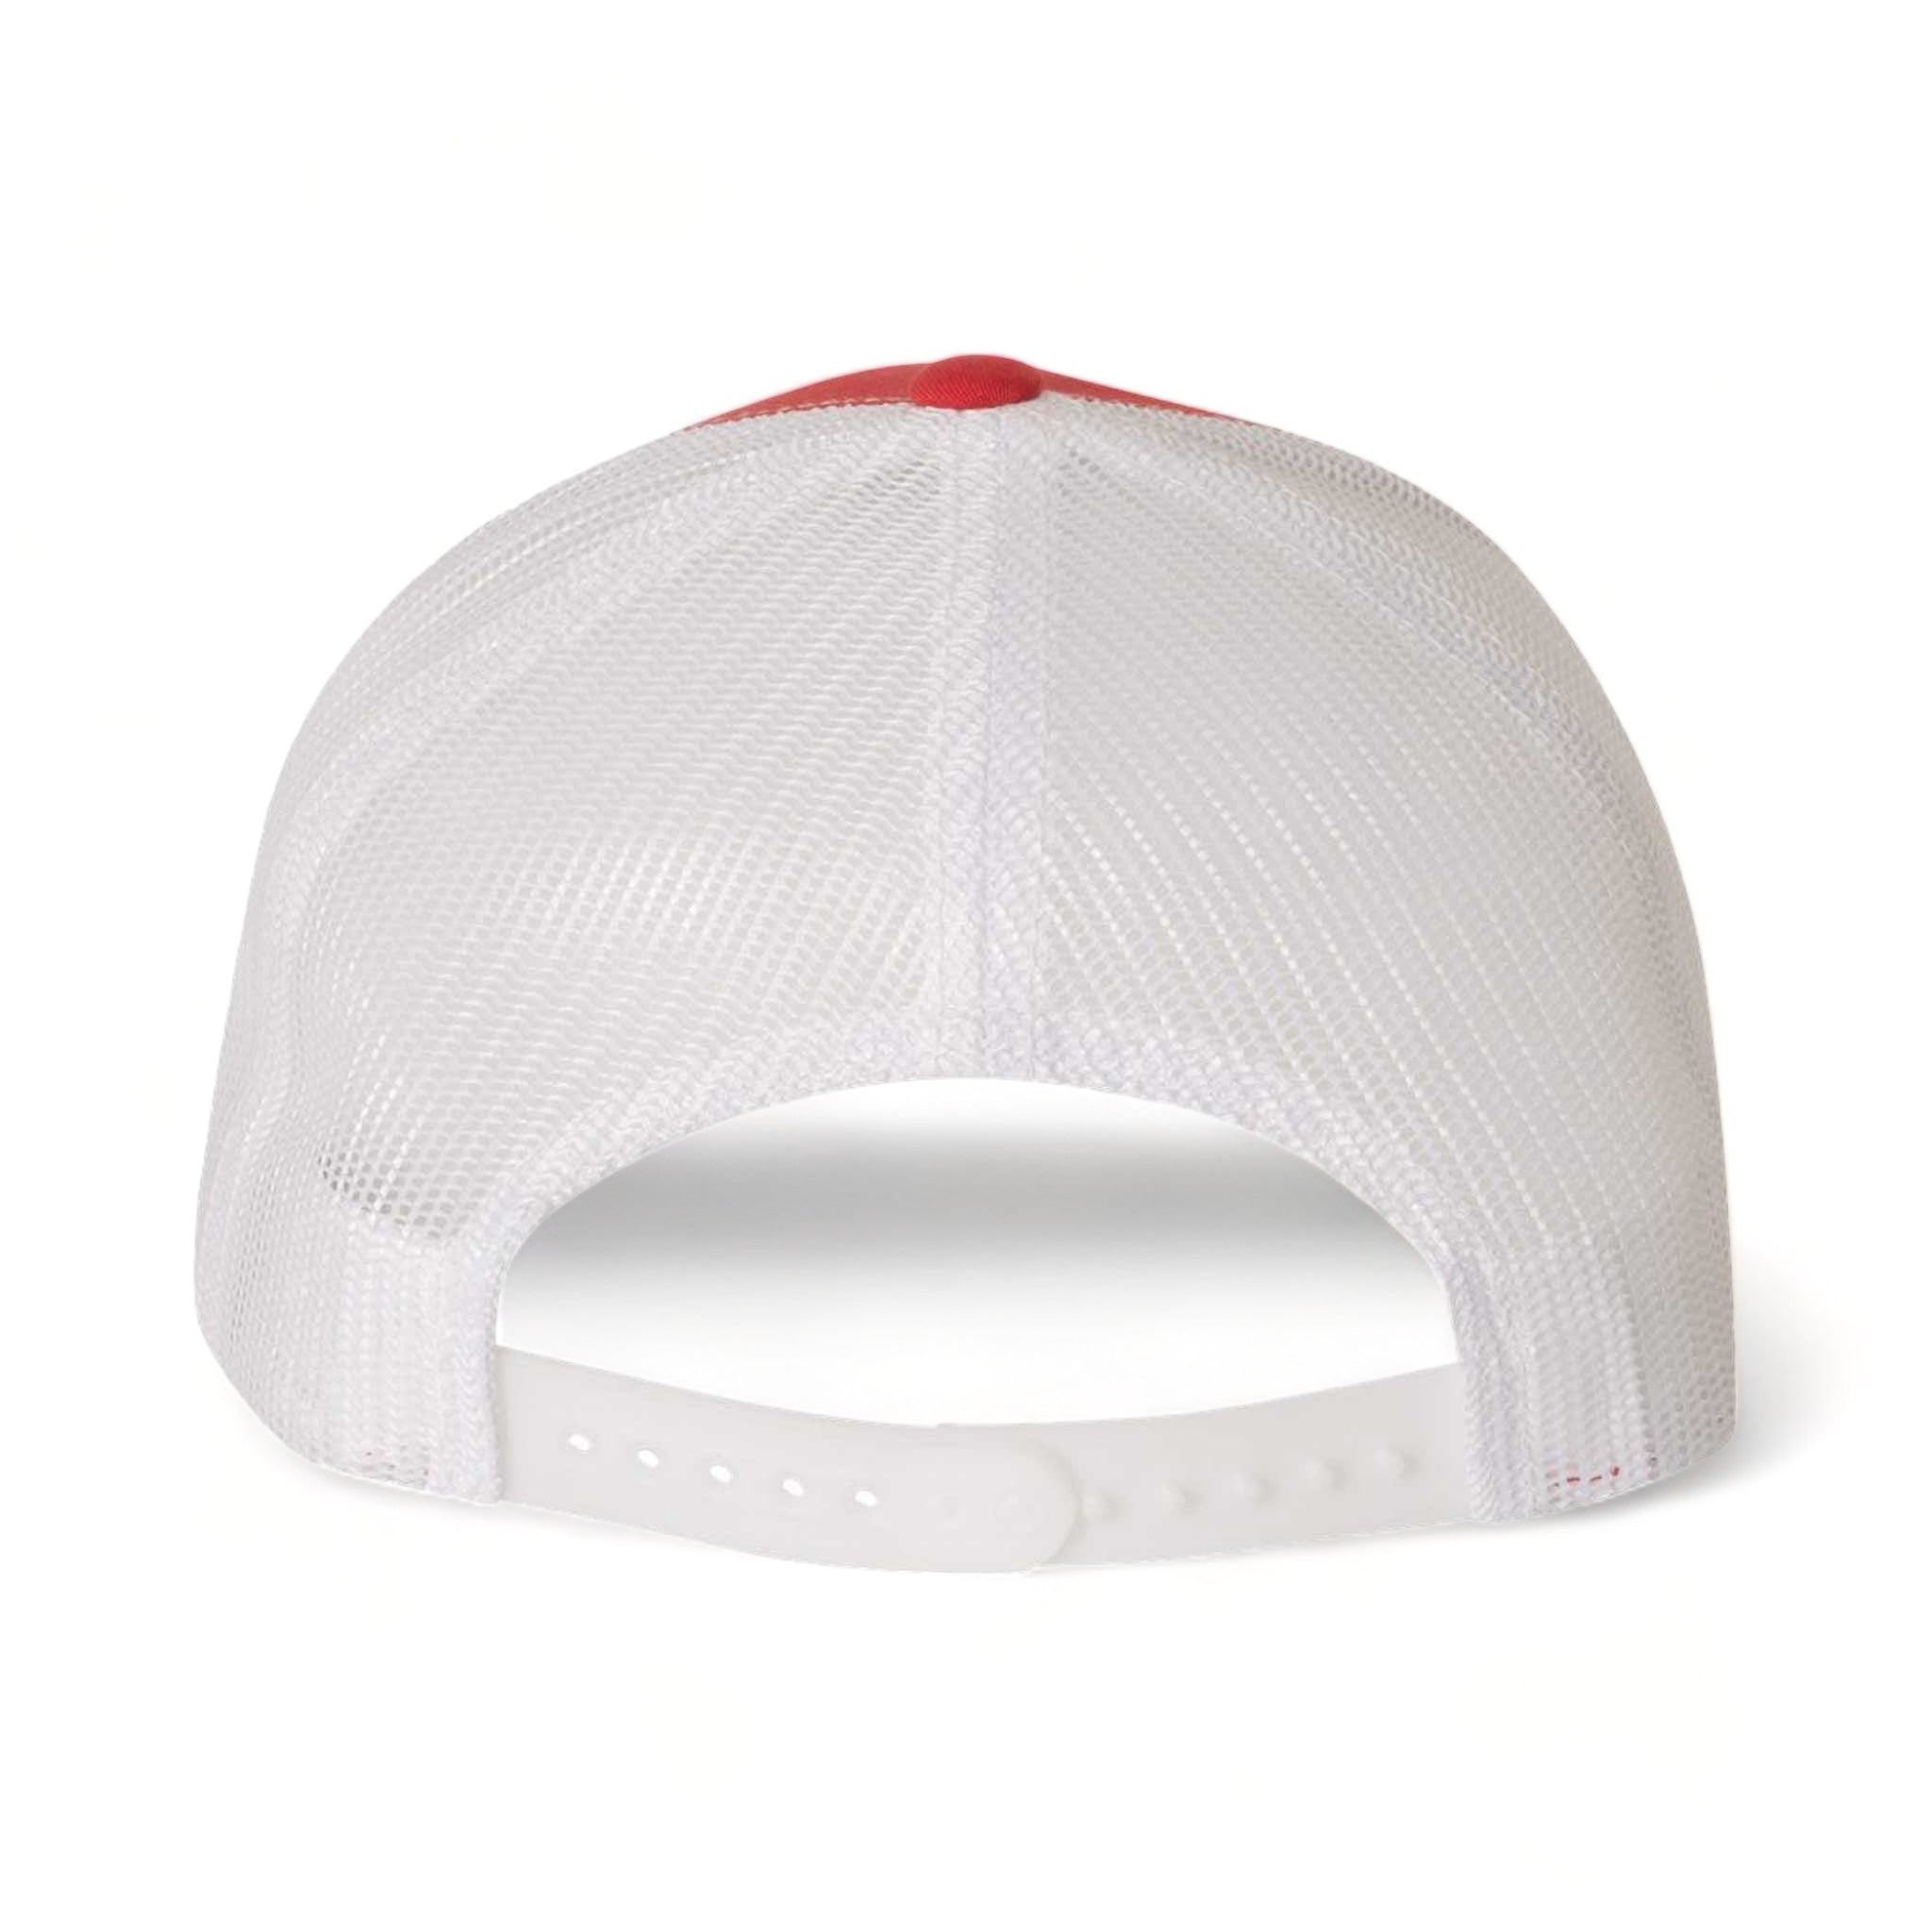 Back view of YP Classics 6606 custom hat in red and white